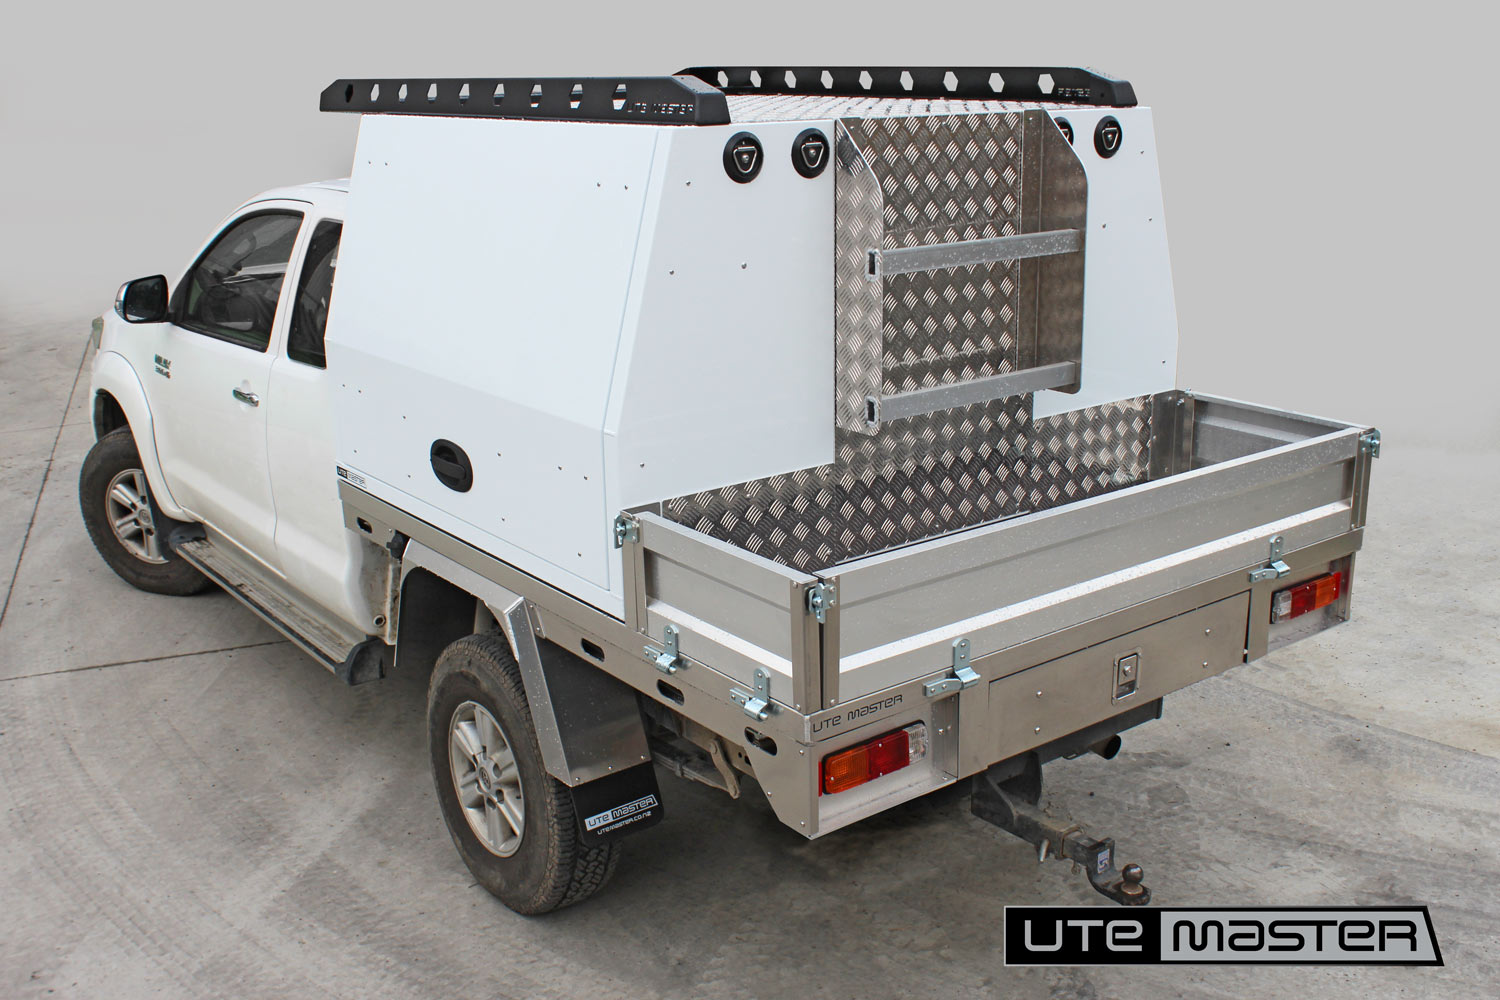 Utemaster Deck and Service Body toolbox service equipment water hydro storage Commercial Ute Mechanic Fitout